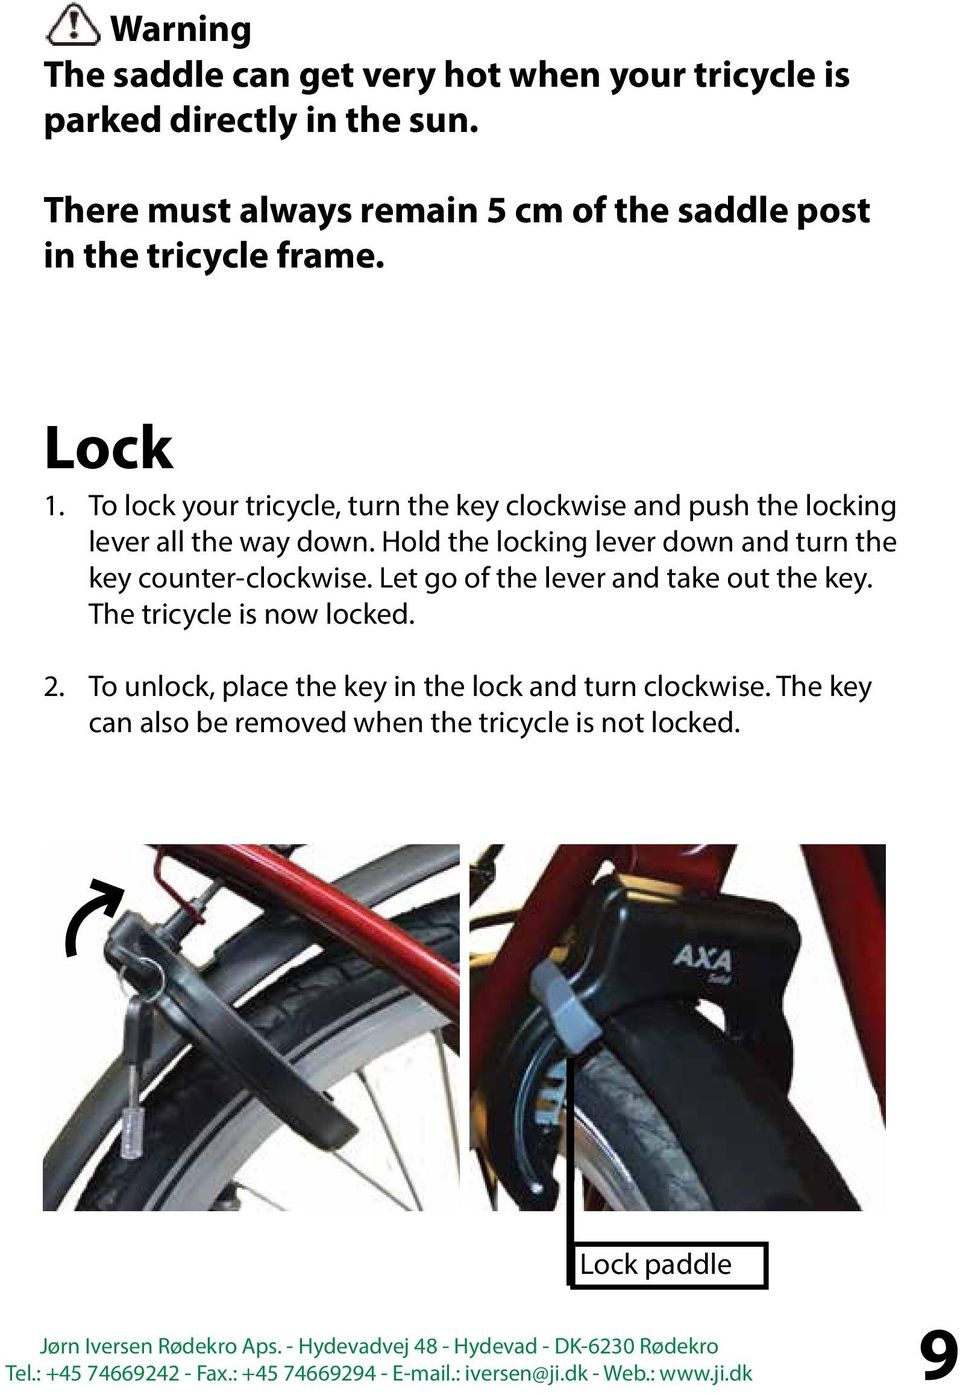 To lock your tricycle, turn the key clockwise and push the locking lever all the way down.